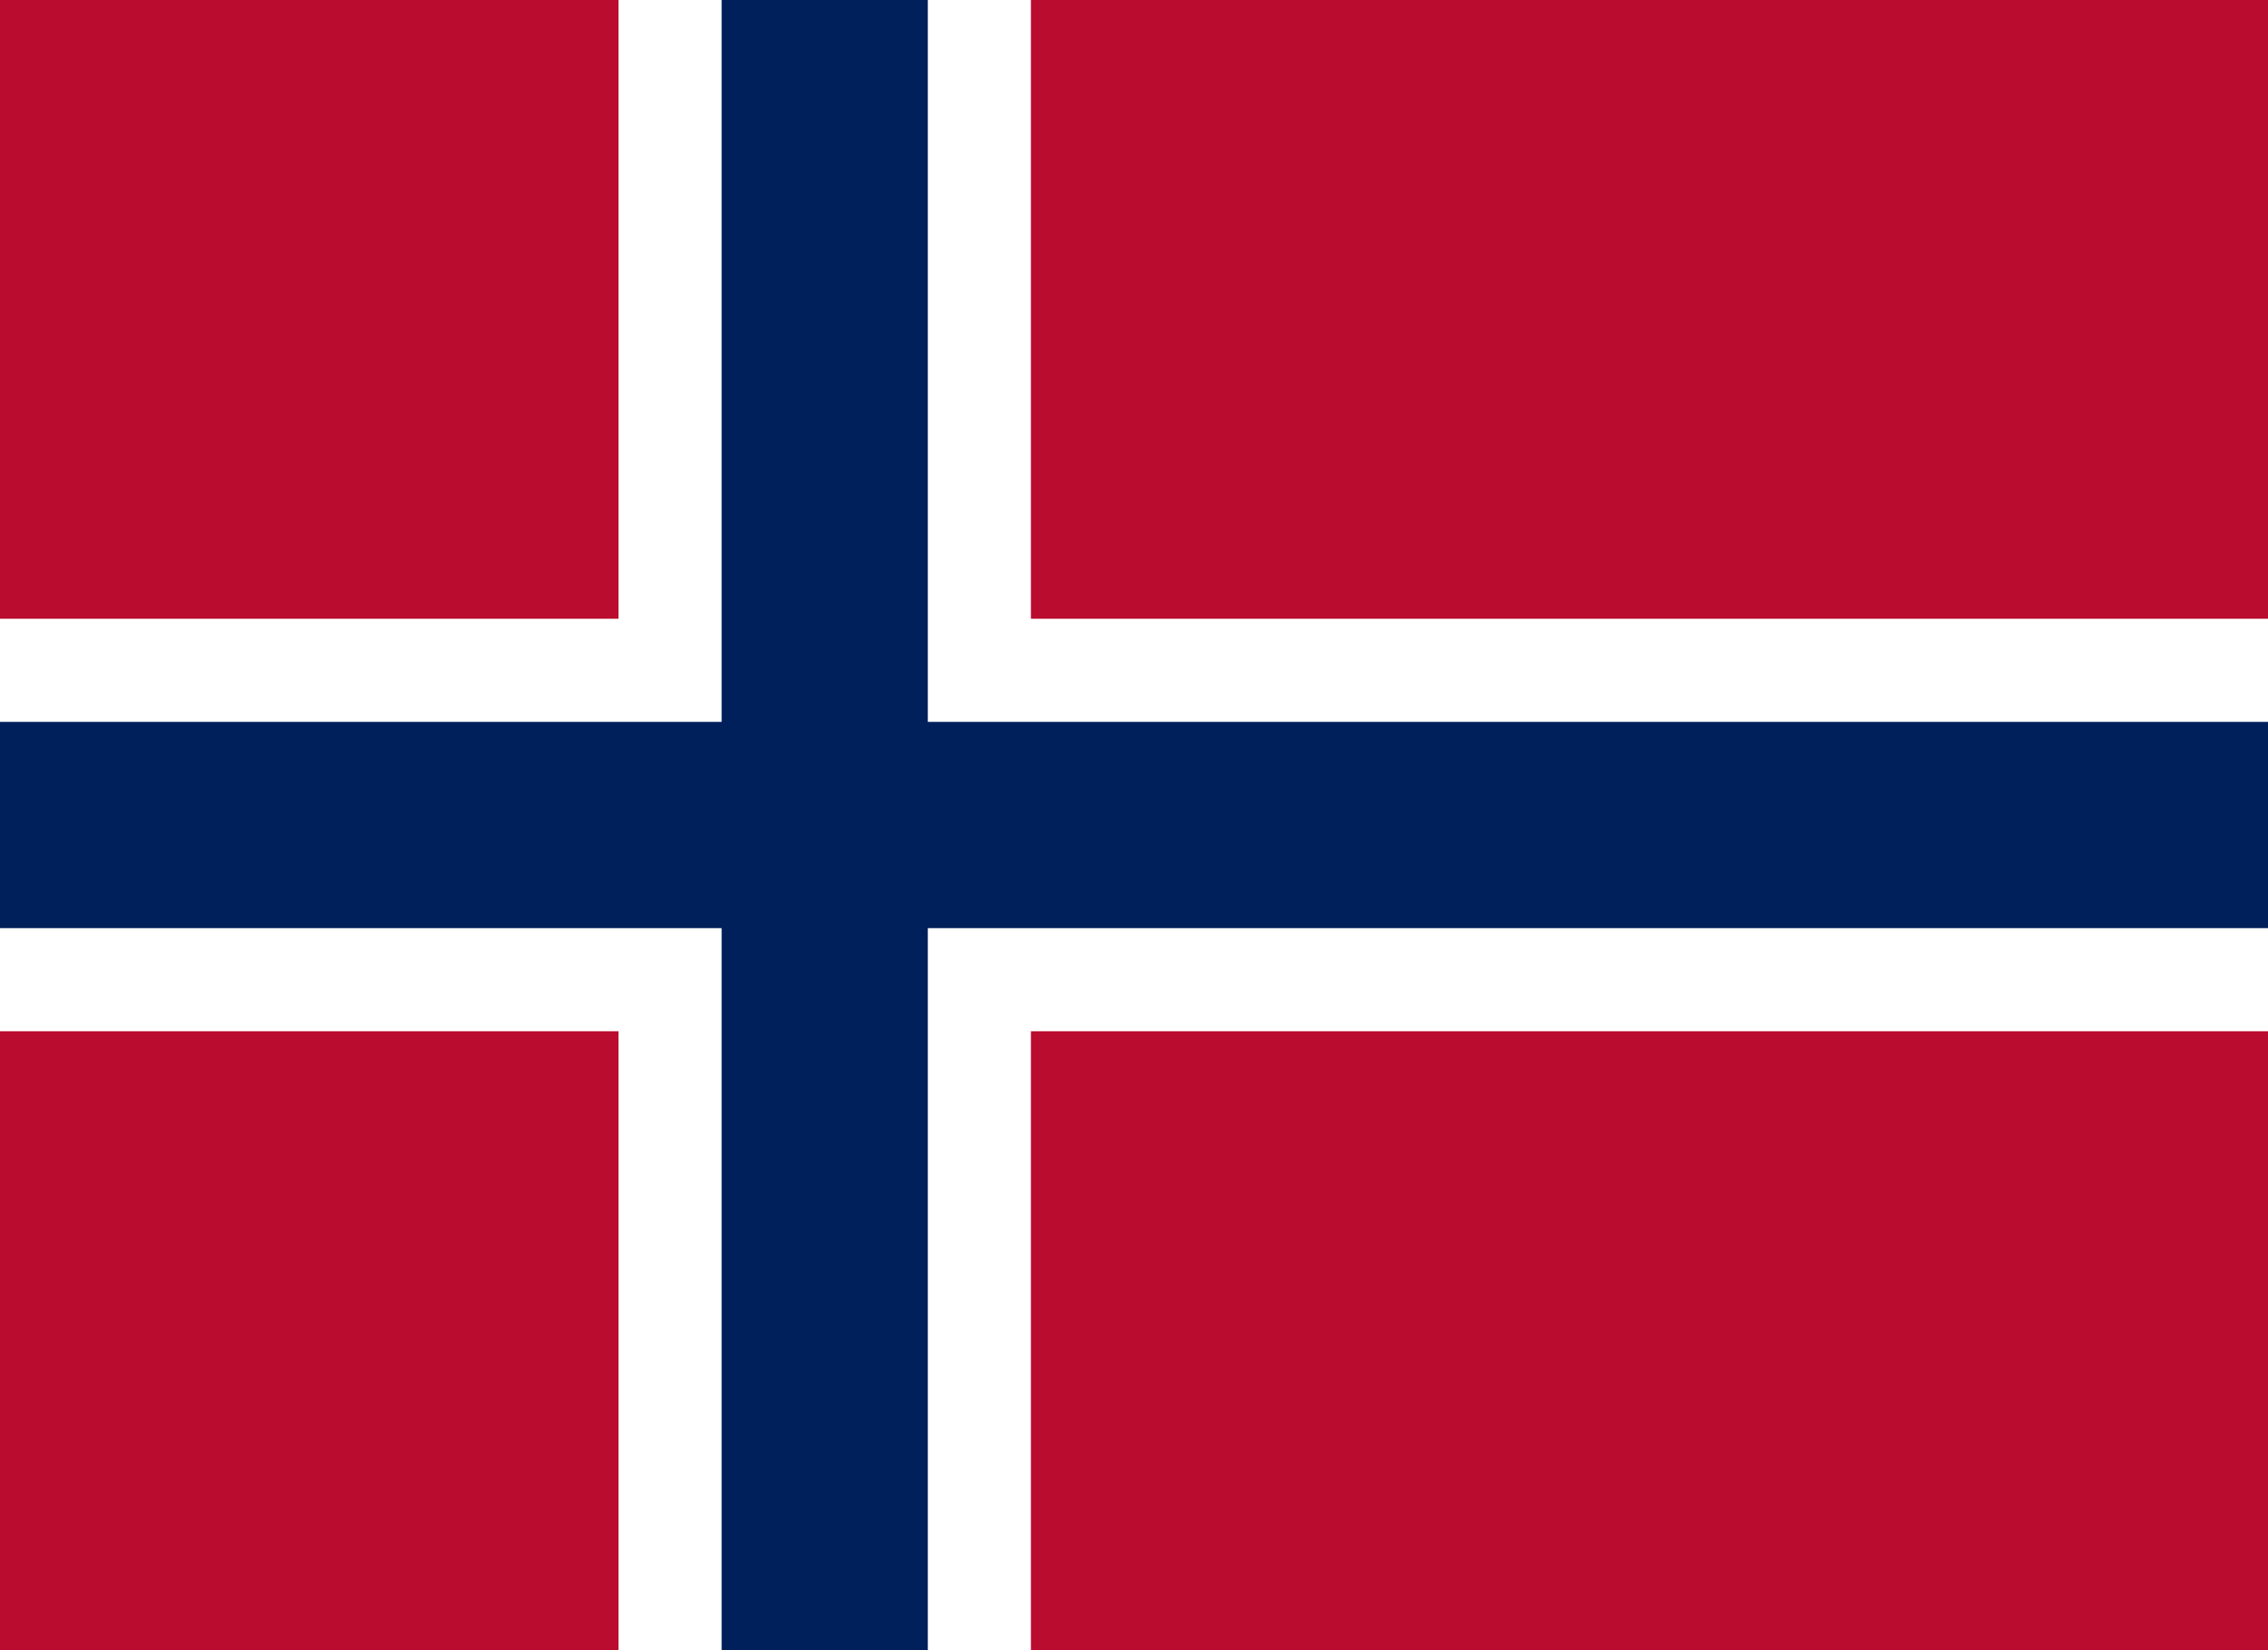 Norway to Host Informal NATO Foreign Affairs Meeting in Oslo, Media Registration Open